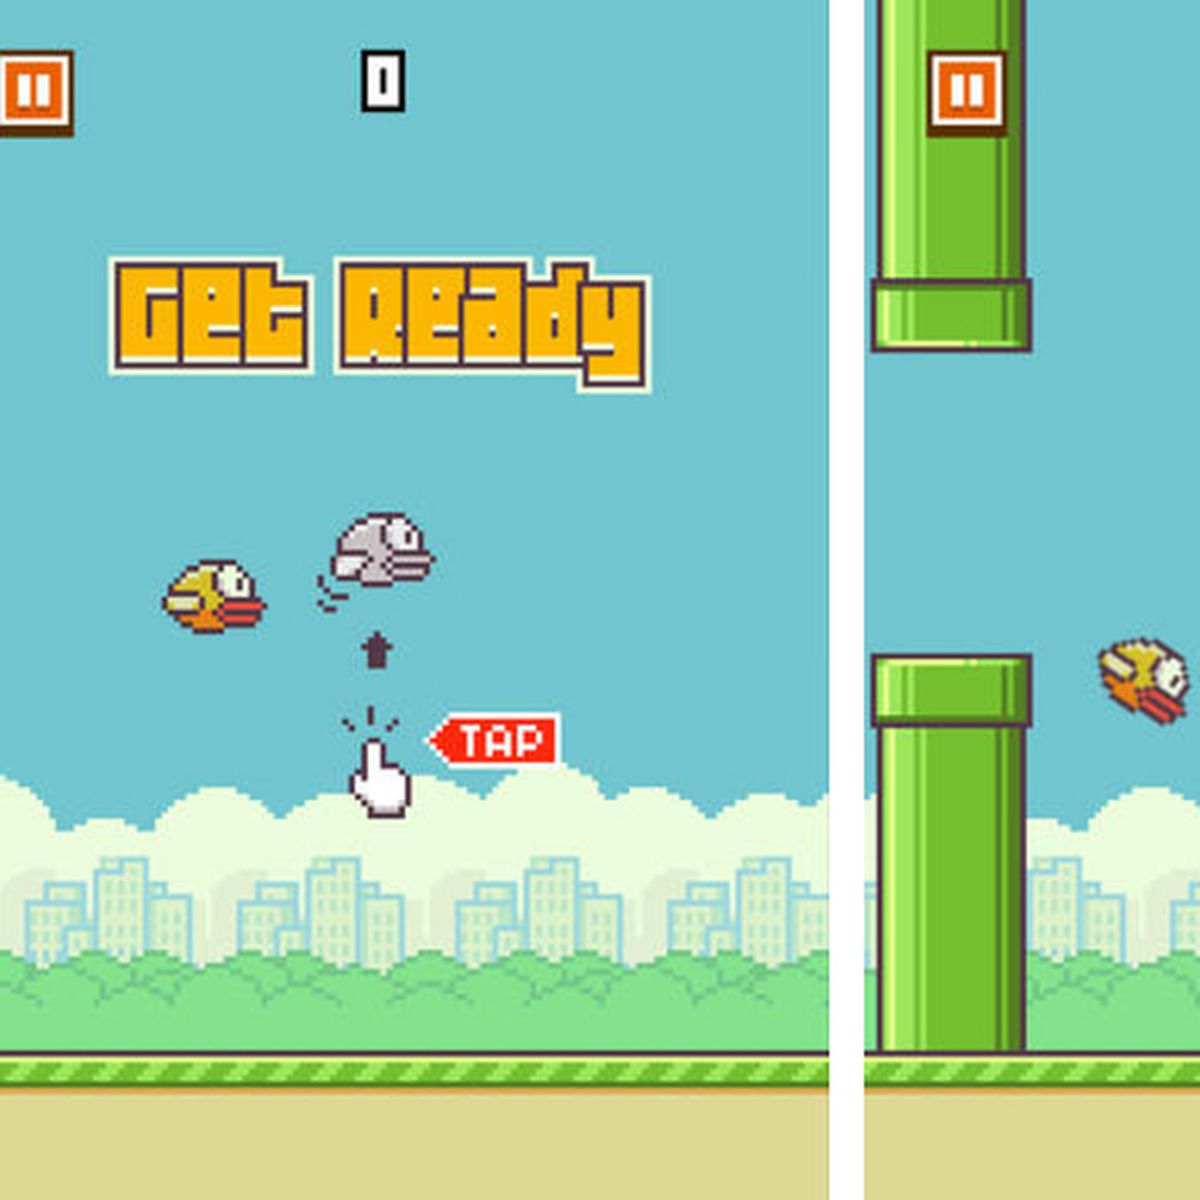 I am trying to make a flappy bird game and so far everything is